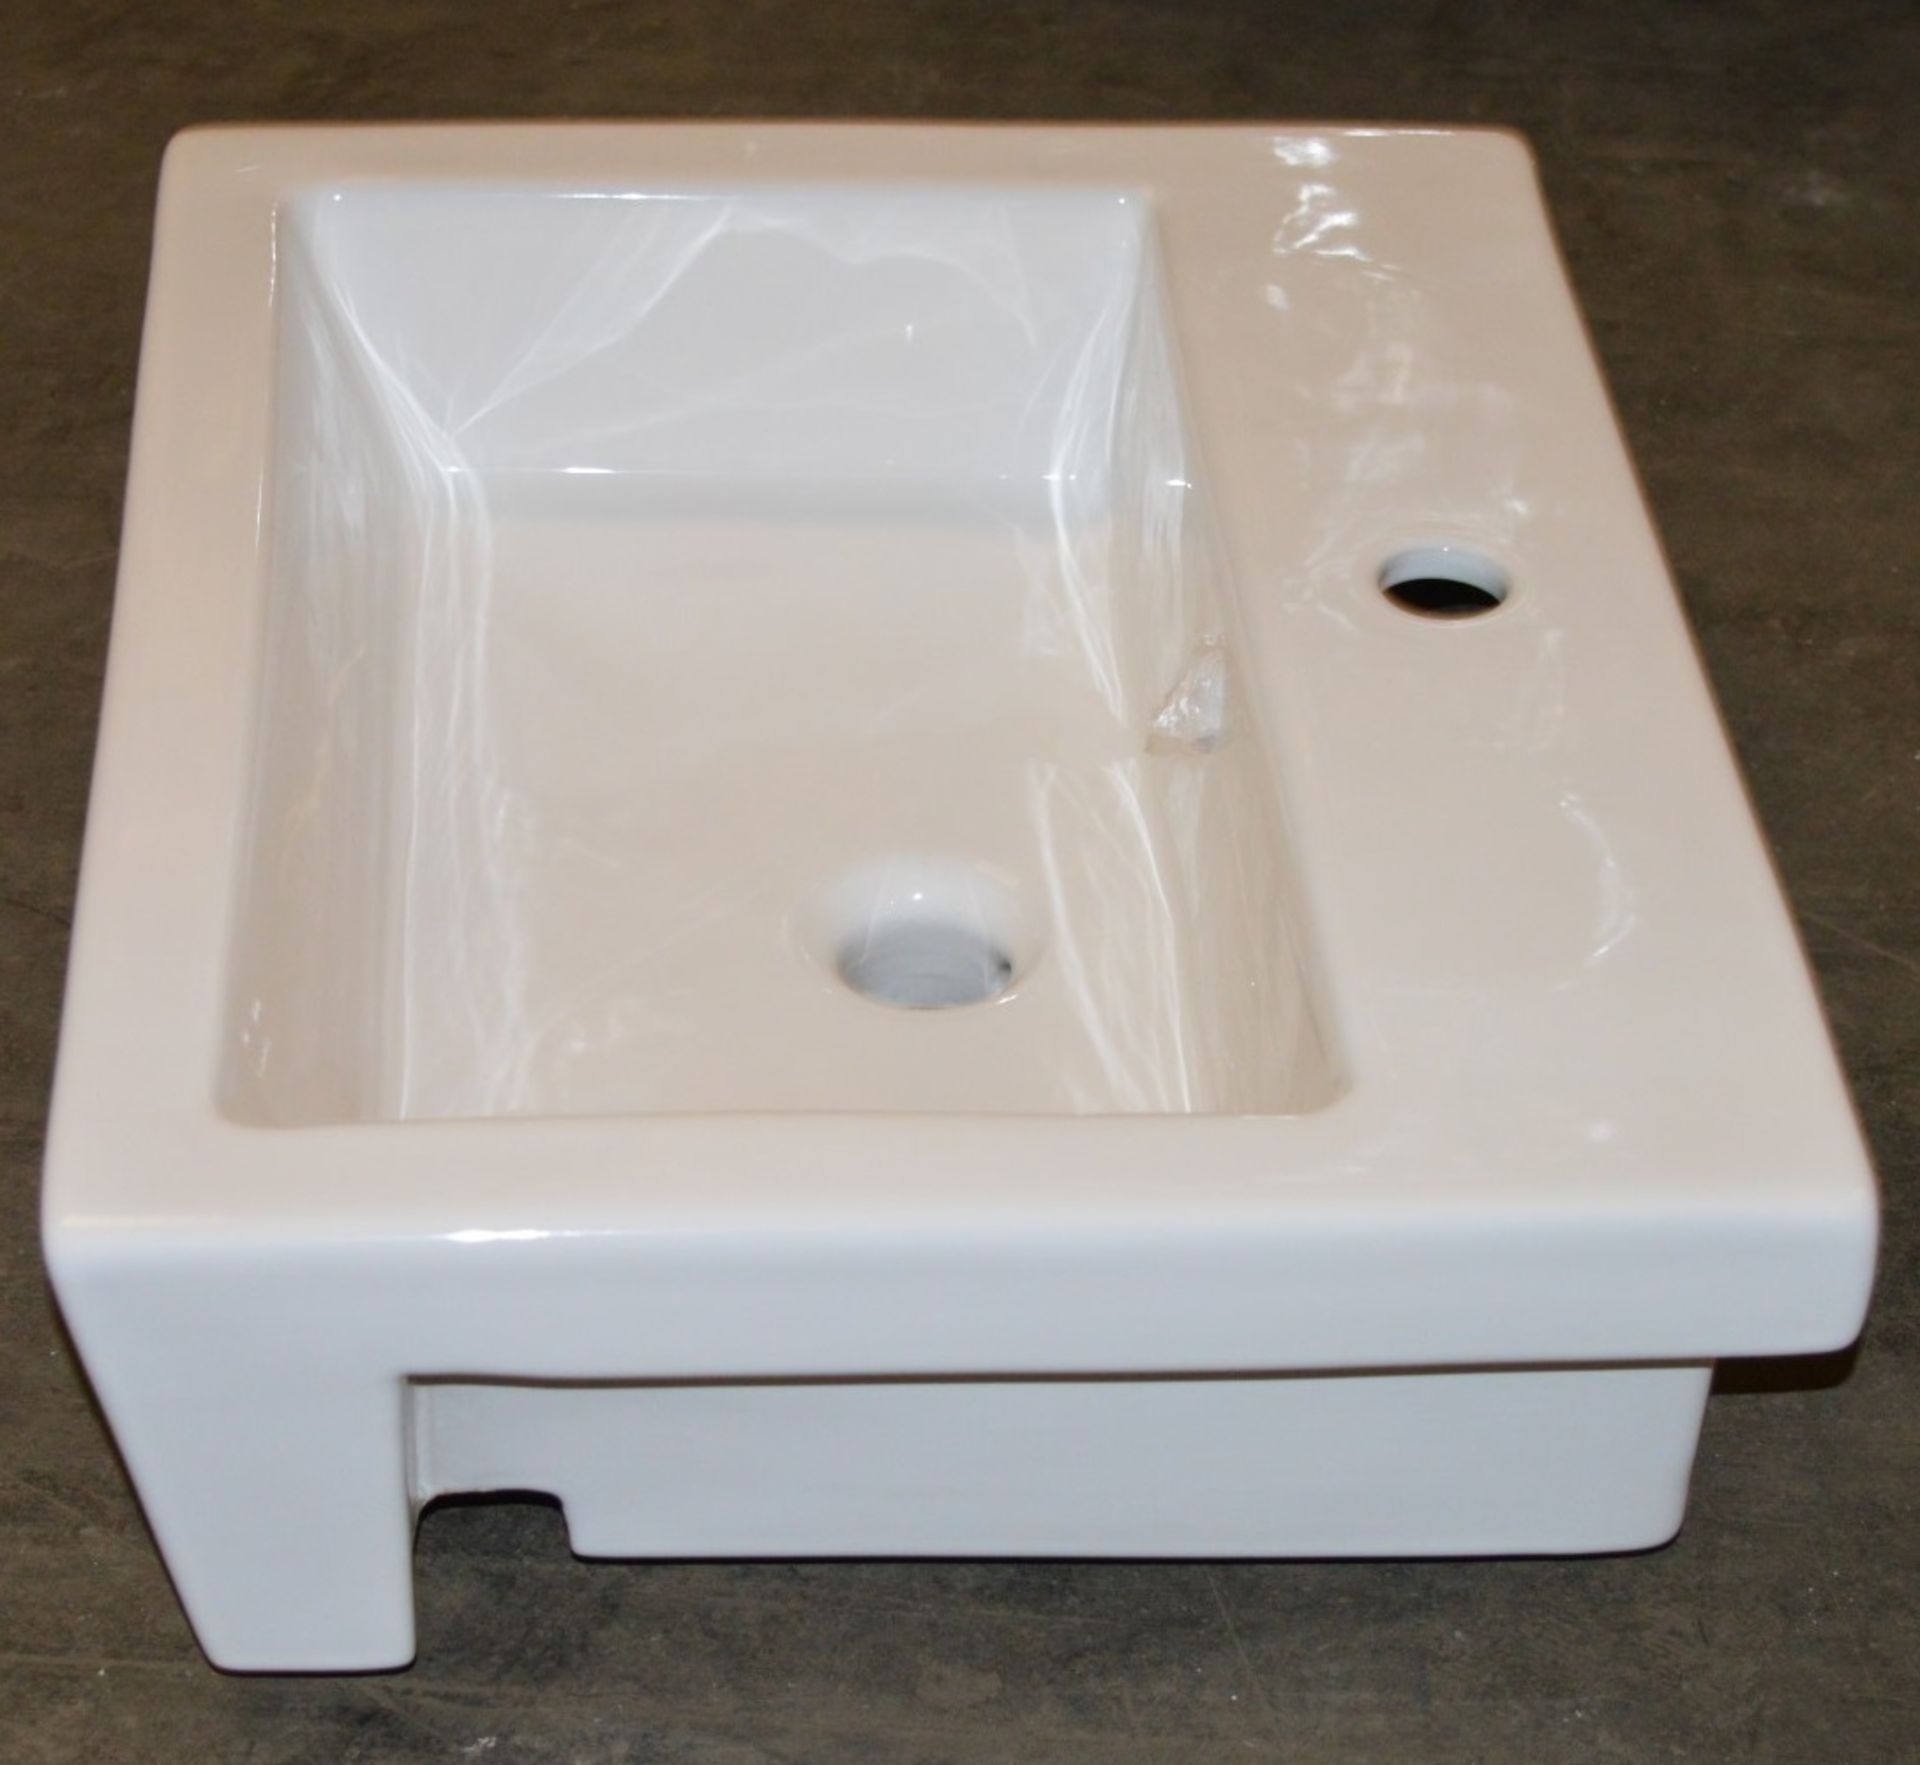 1 x Vogue Bathrooms ZEN Single Tap Hole SEMI RECESSED SINK BASIN - 550mm Width - Brand New Boxed - Image 5 of 5